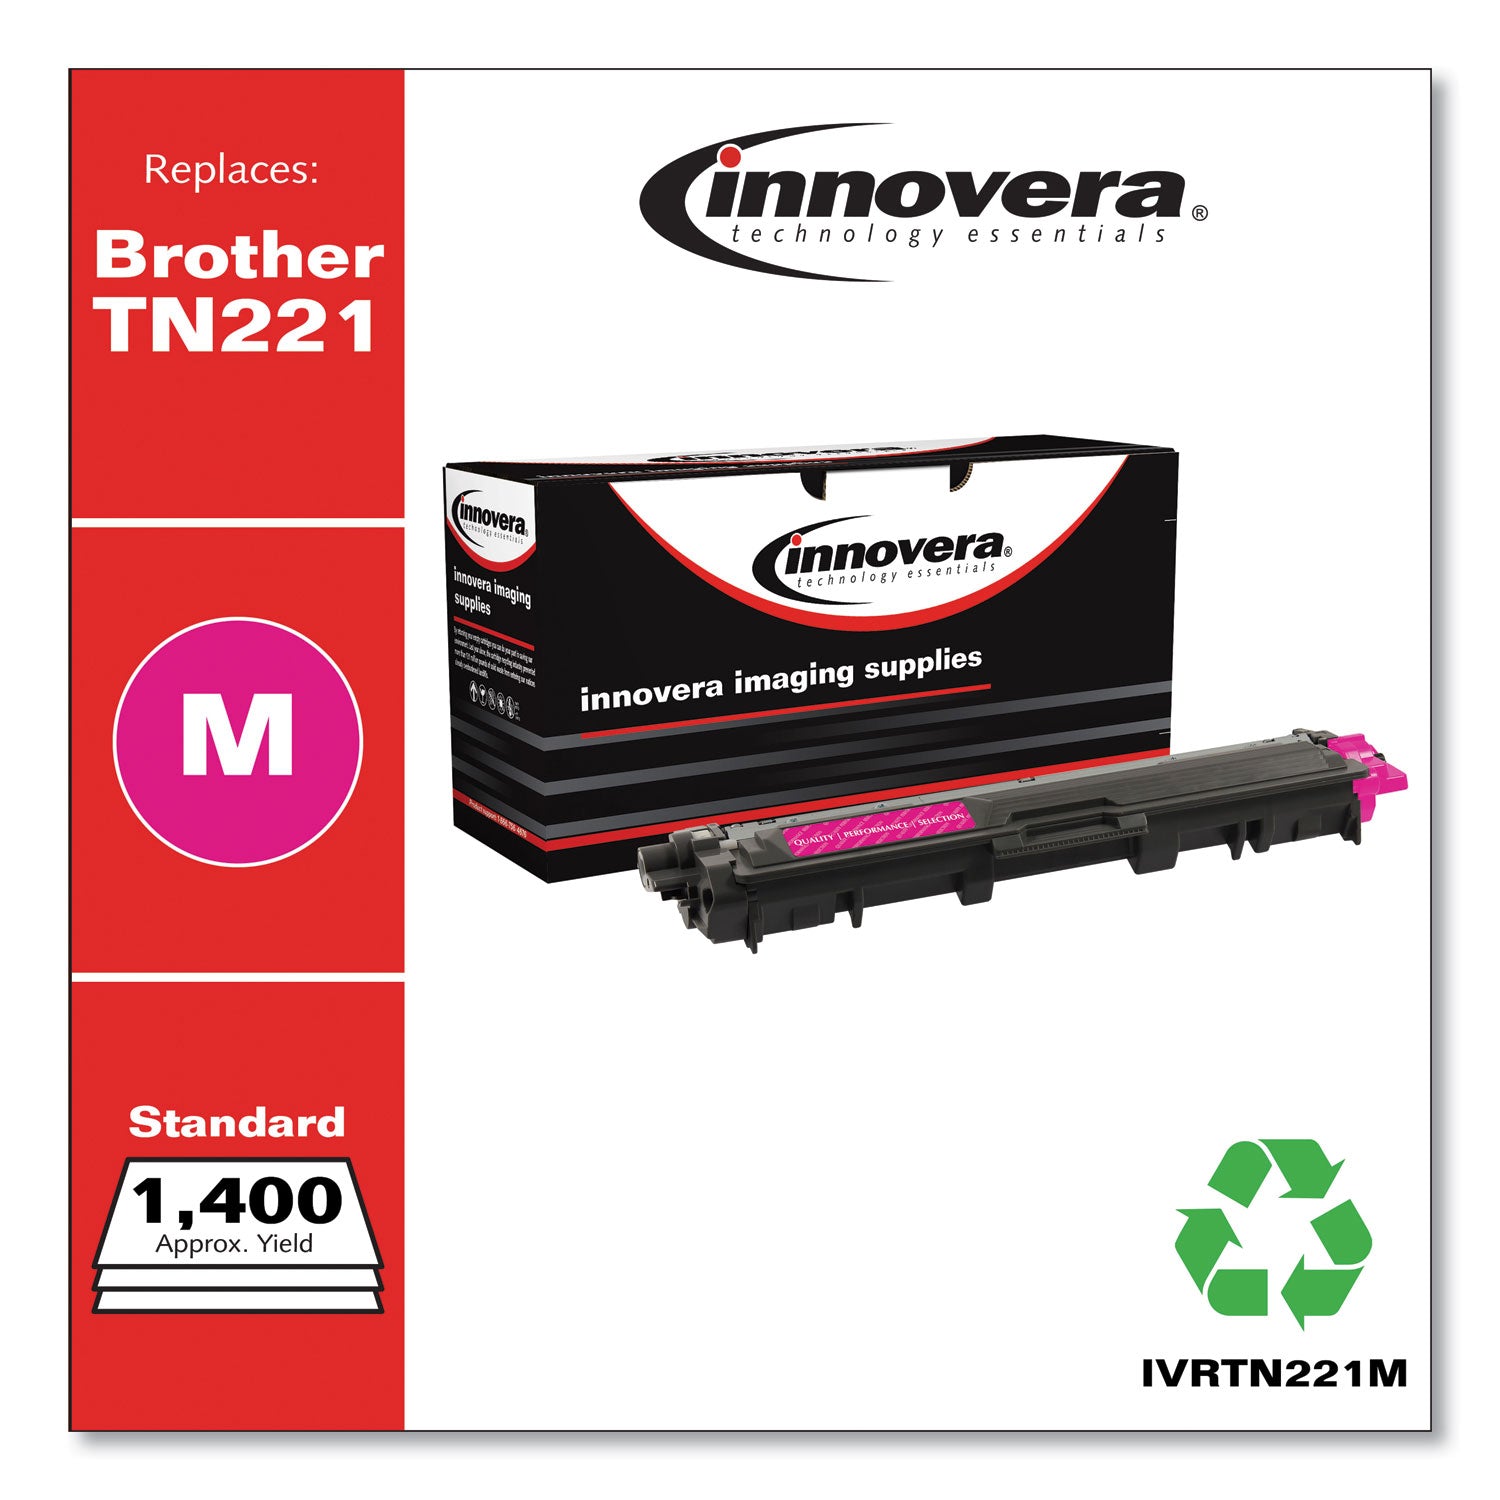 remanufactured-magenta-toner-replacement-for-tn221m-1400-page-yield_ivrtn221m - 2